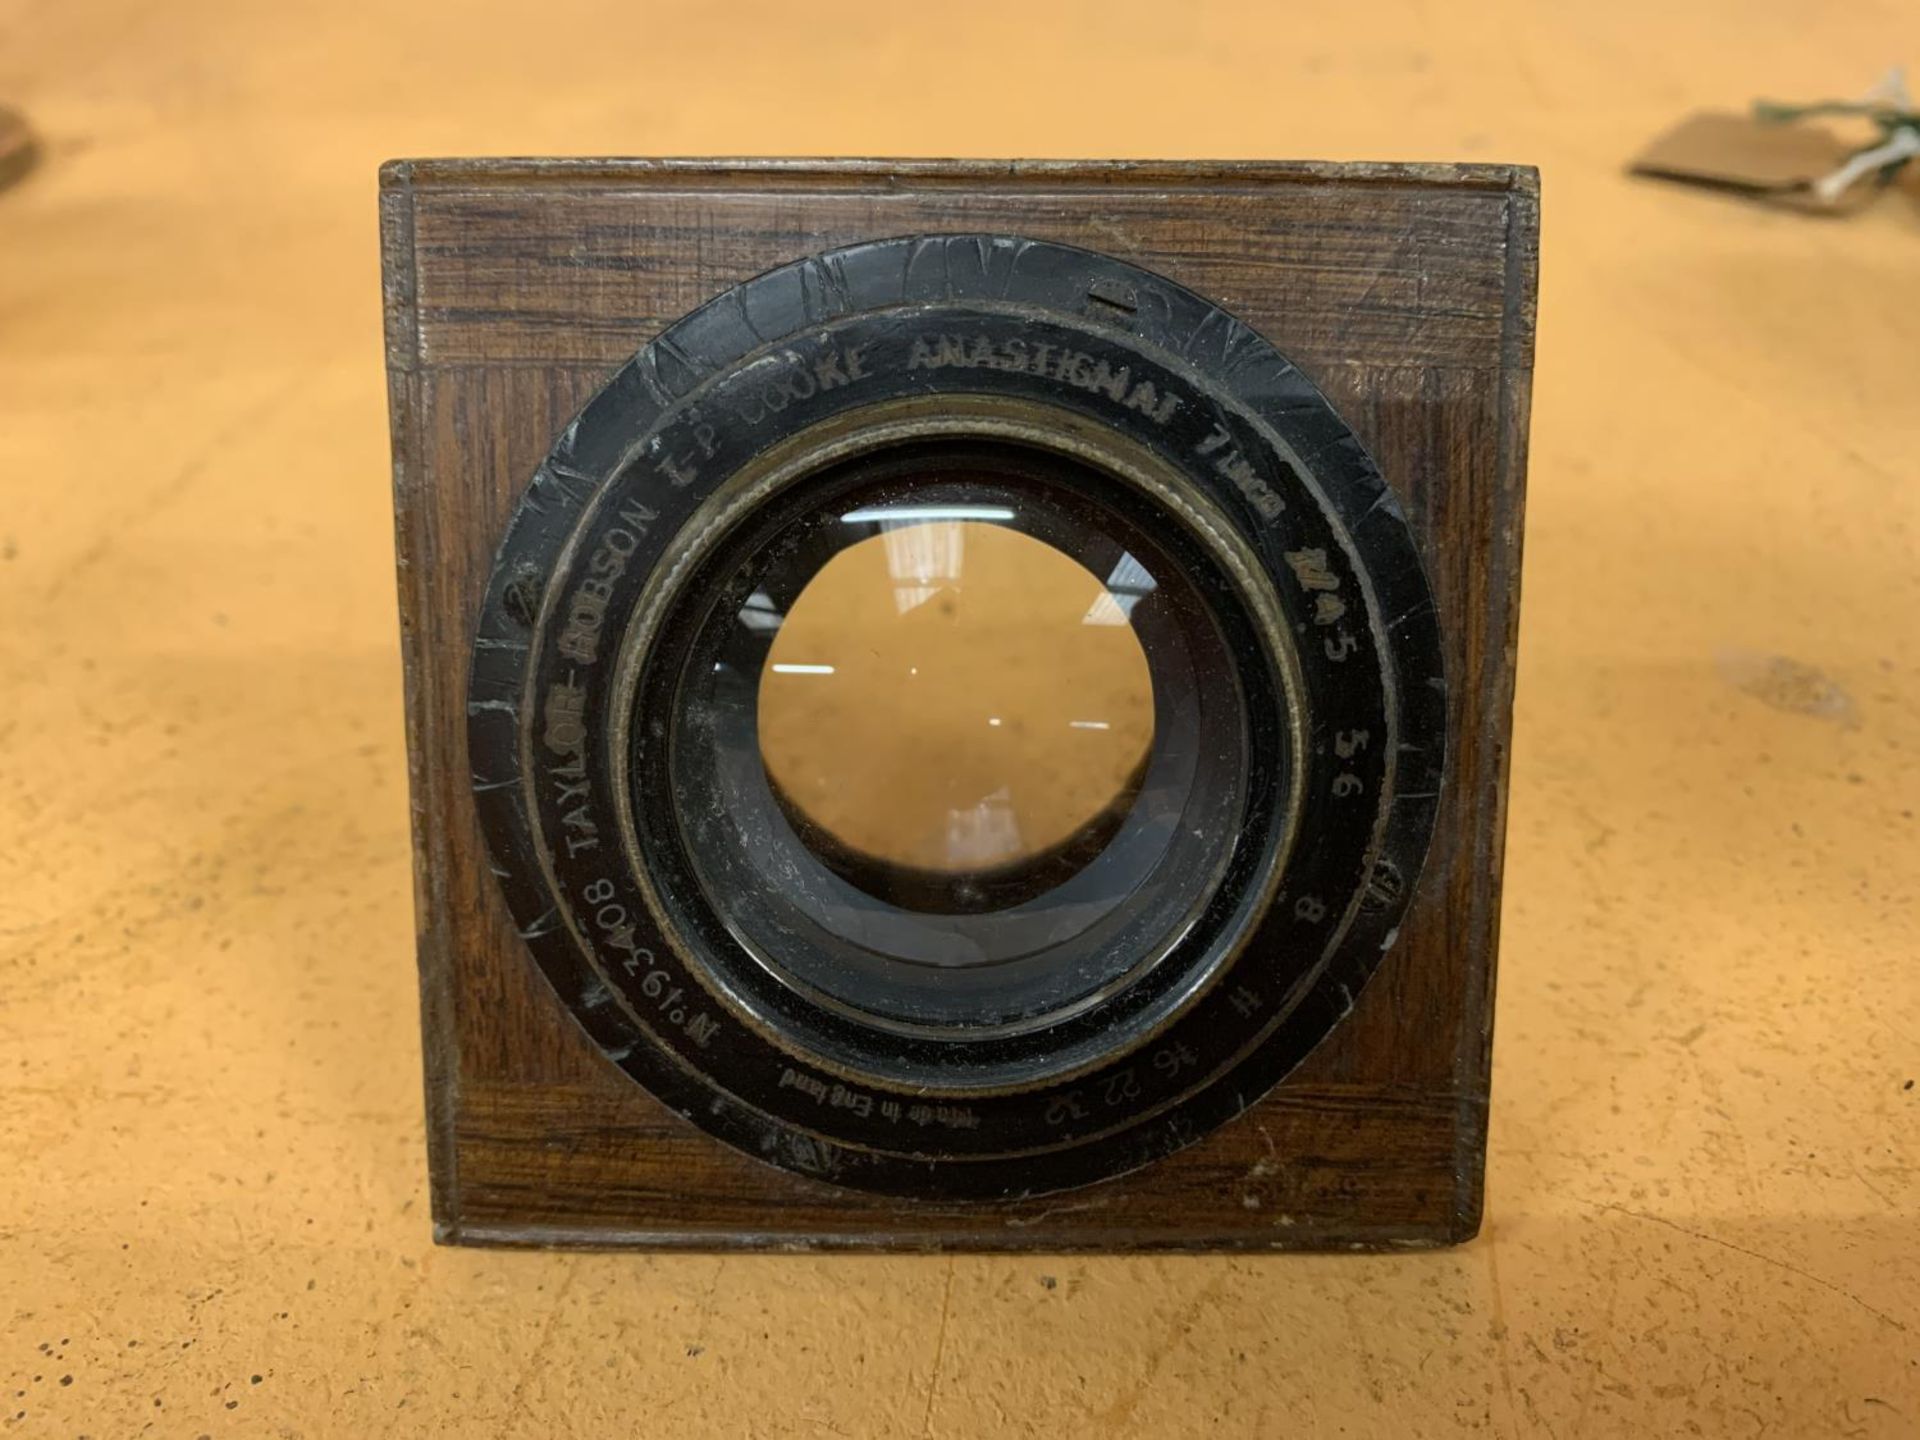 A VINTAGE COOKE ANASTIGMAT 7 INCH TAYLOR HOBSON NO 193408 CAMERA LENS IN WOODEN SURROUND - Image 3 of 3